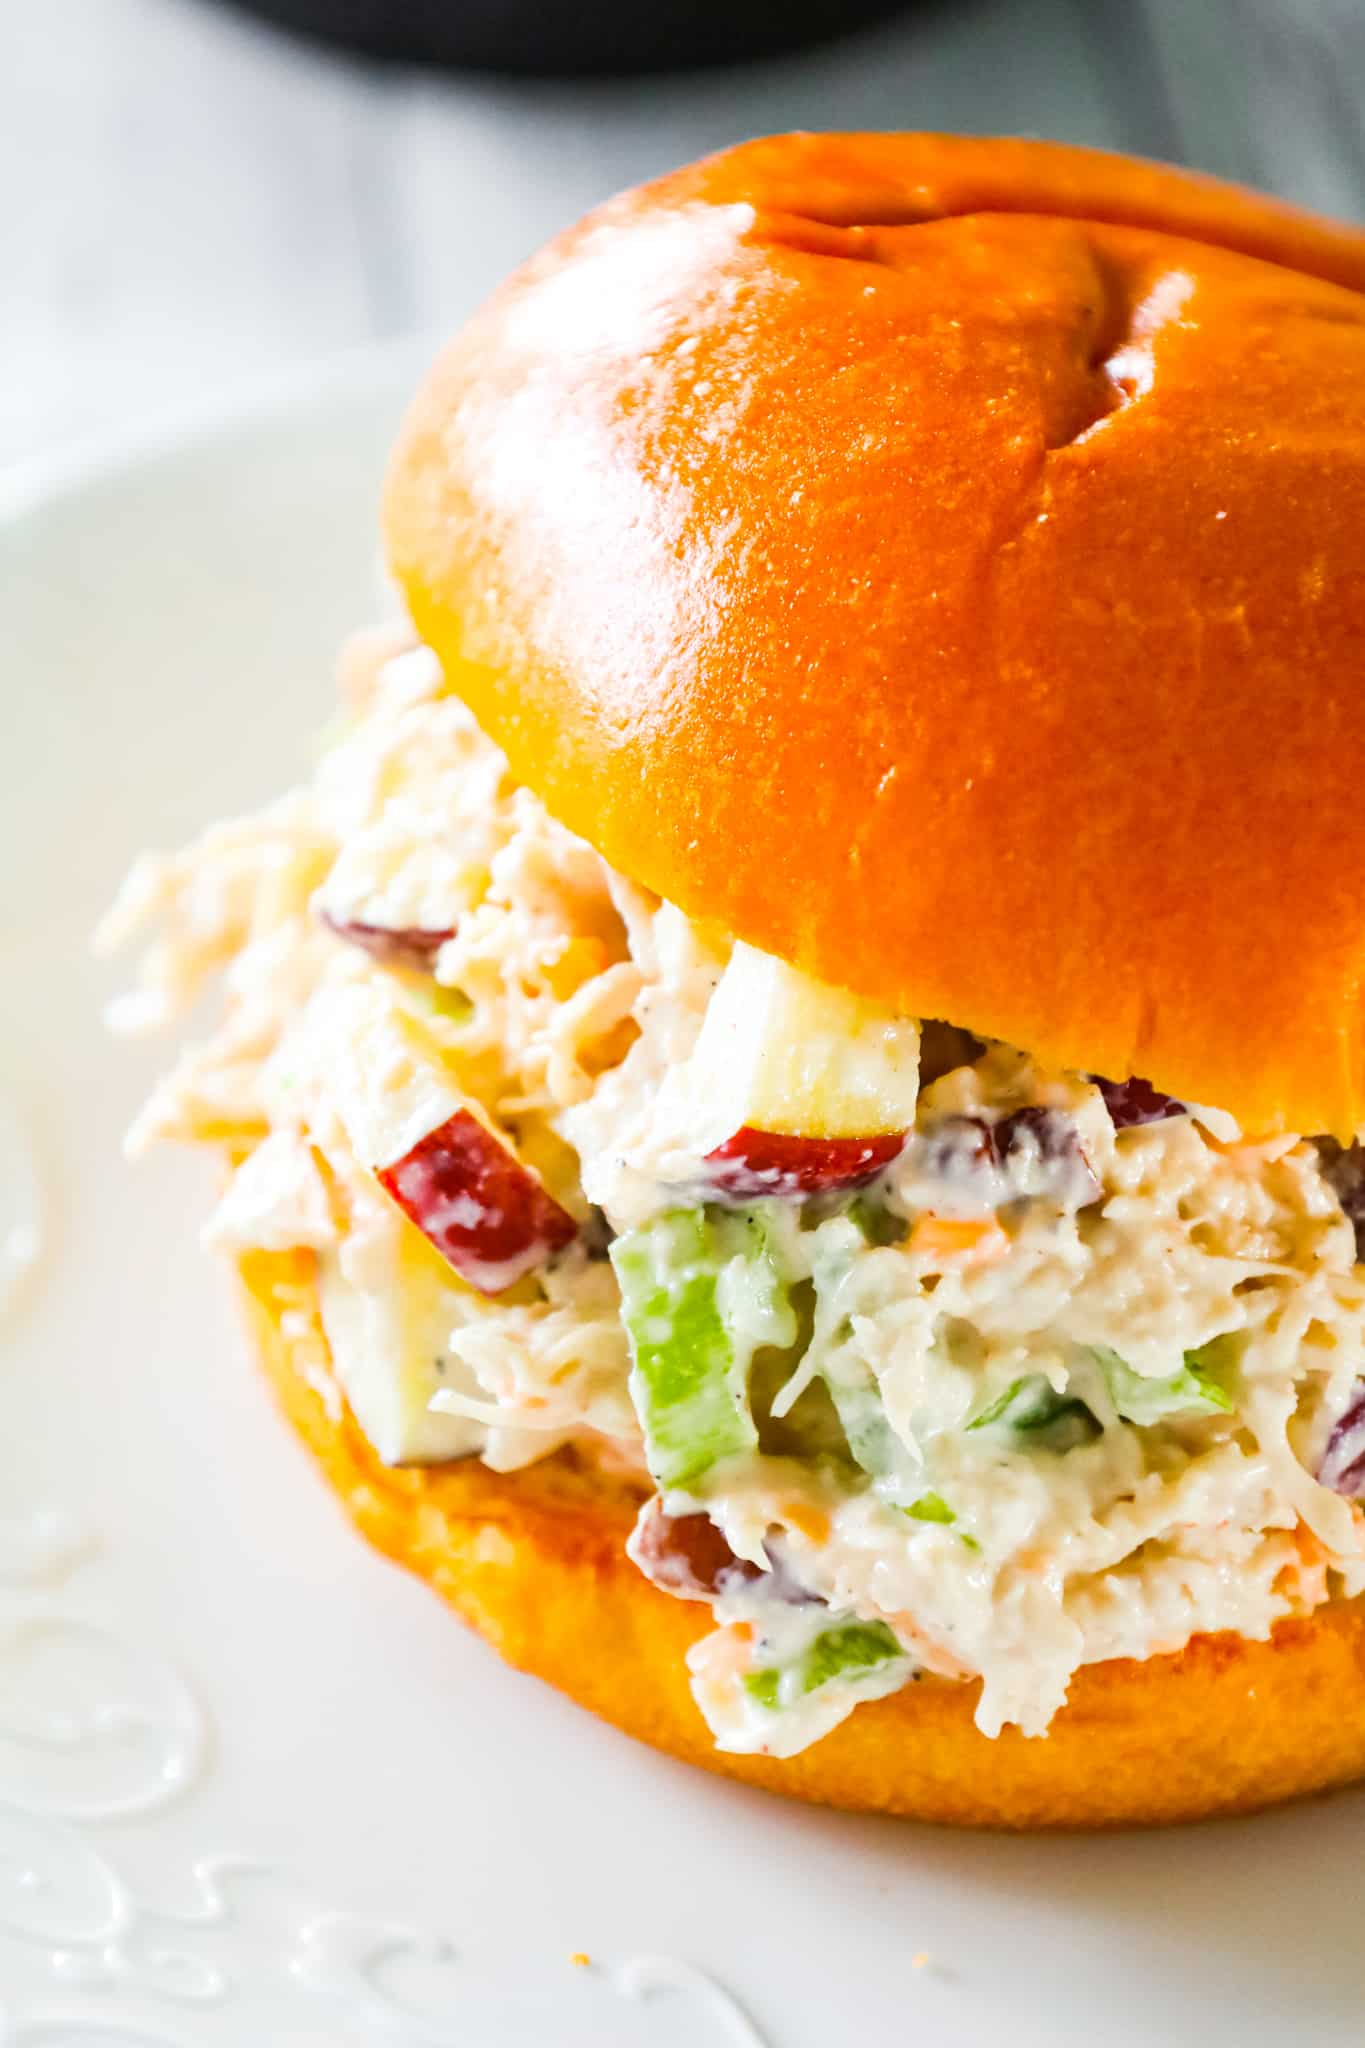 Chicken Salad with Apples is tasty lunch or dinner recipe using shredded rotisserie chicken and loaded with mayo, celery, diced apples, pecans and shredded cheddar.